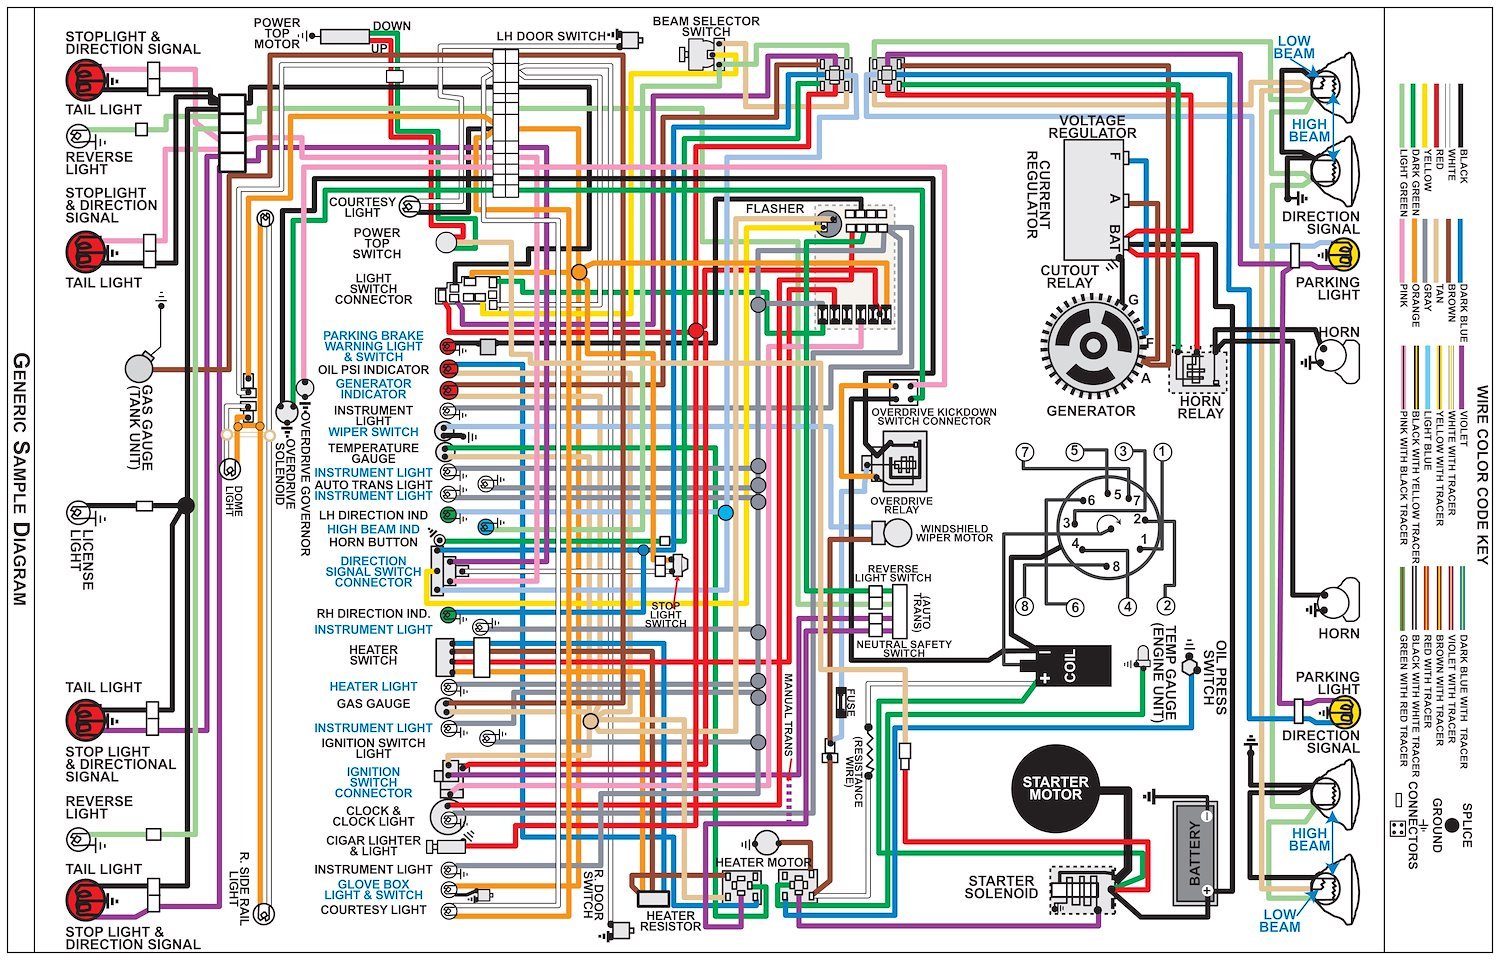 Wiring Diagram for 1961 Chevy Truck, 11 in. x 17 in., Laminated